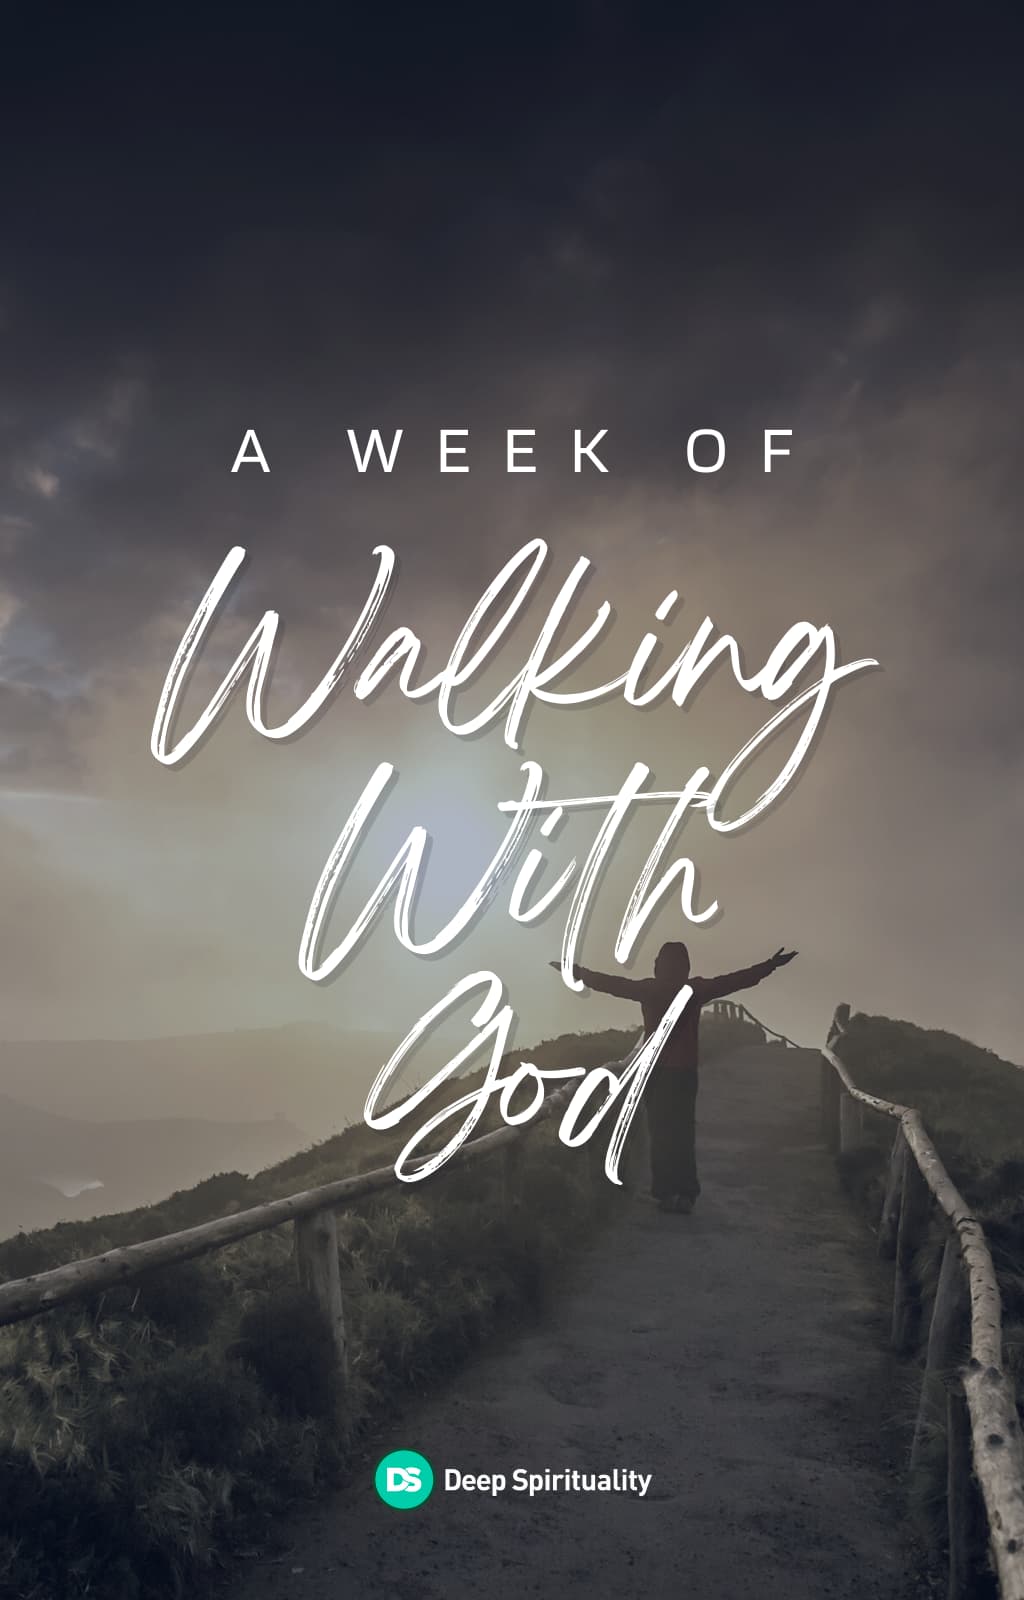 A Week of Walking with God 19